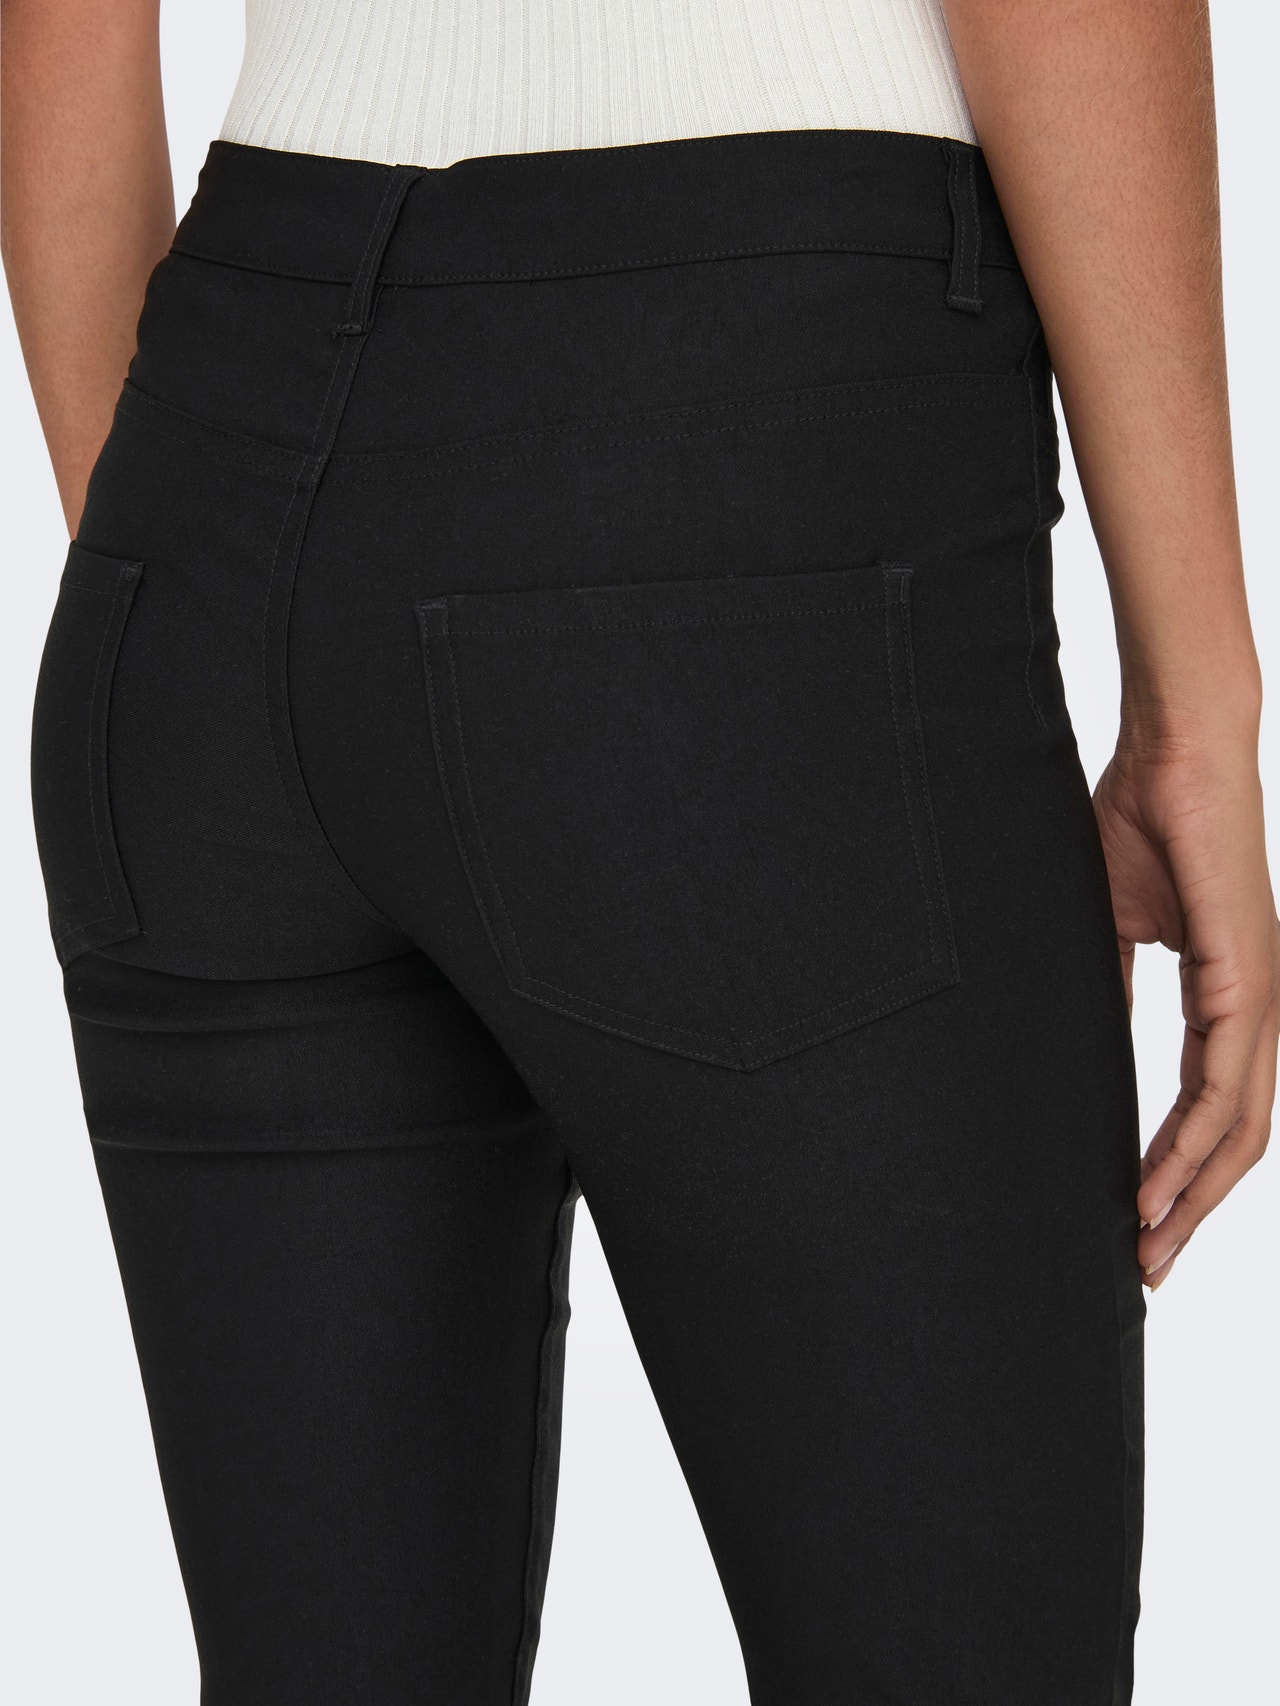 ONLY Skinny trousers with mid waist -Black - 15291267